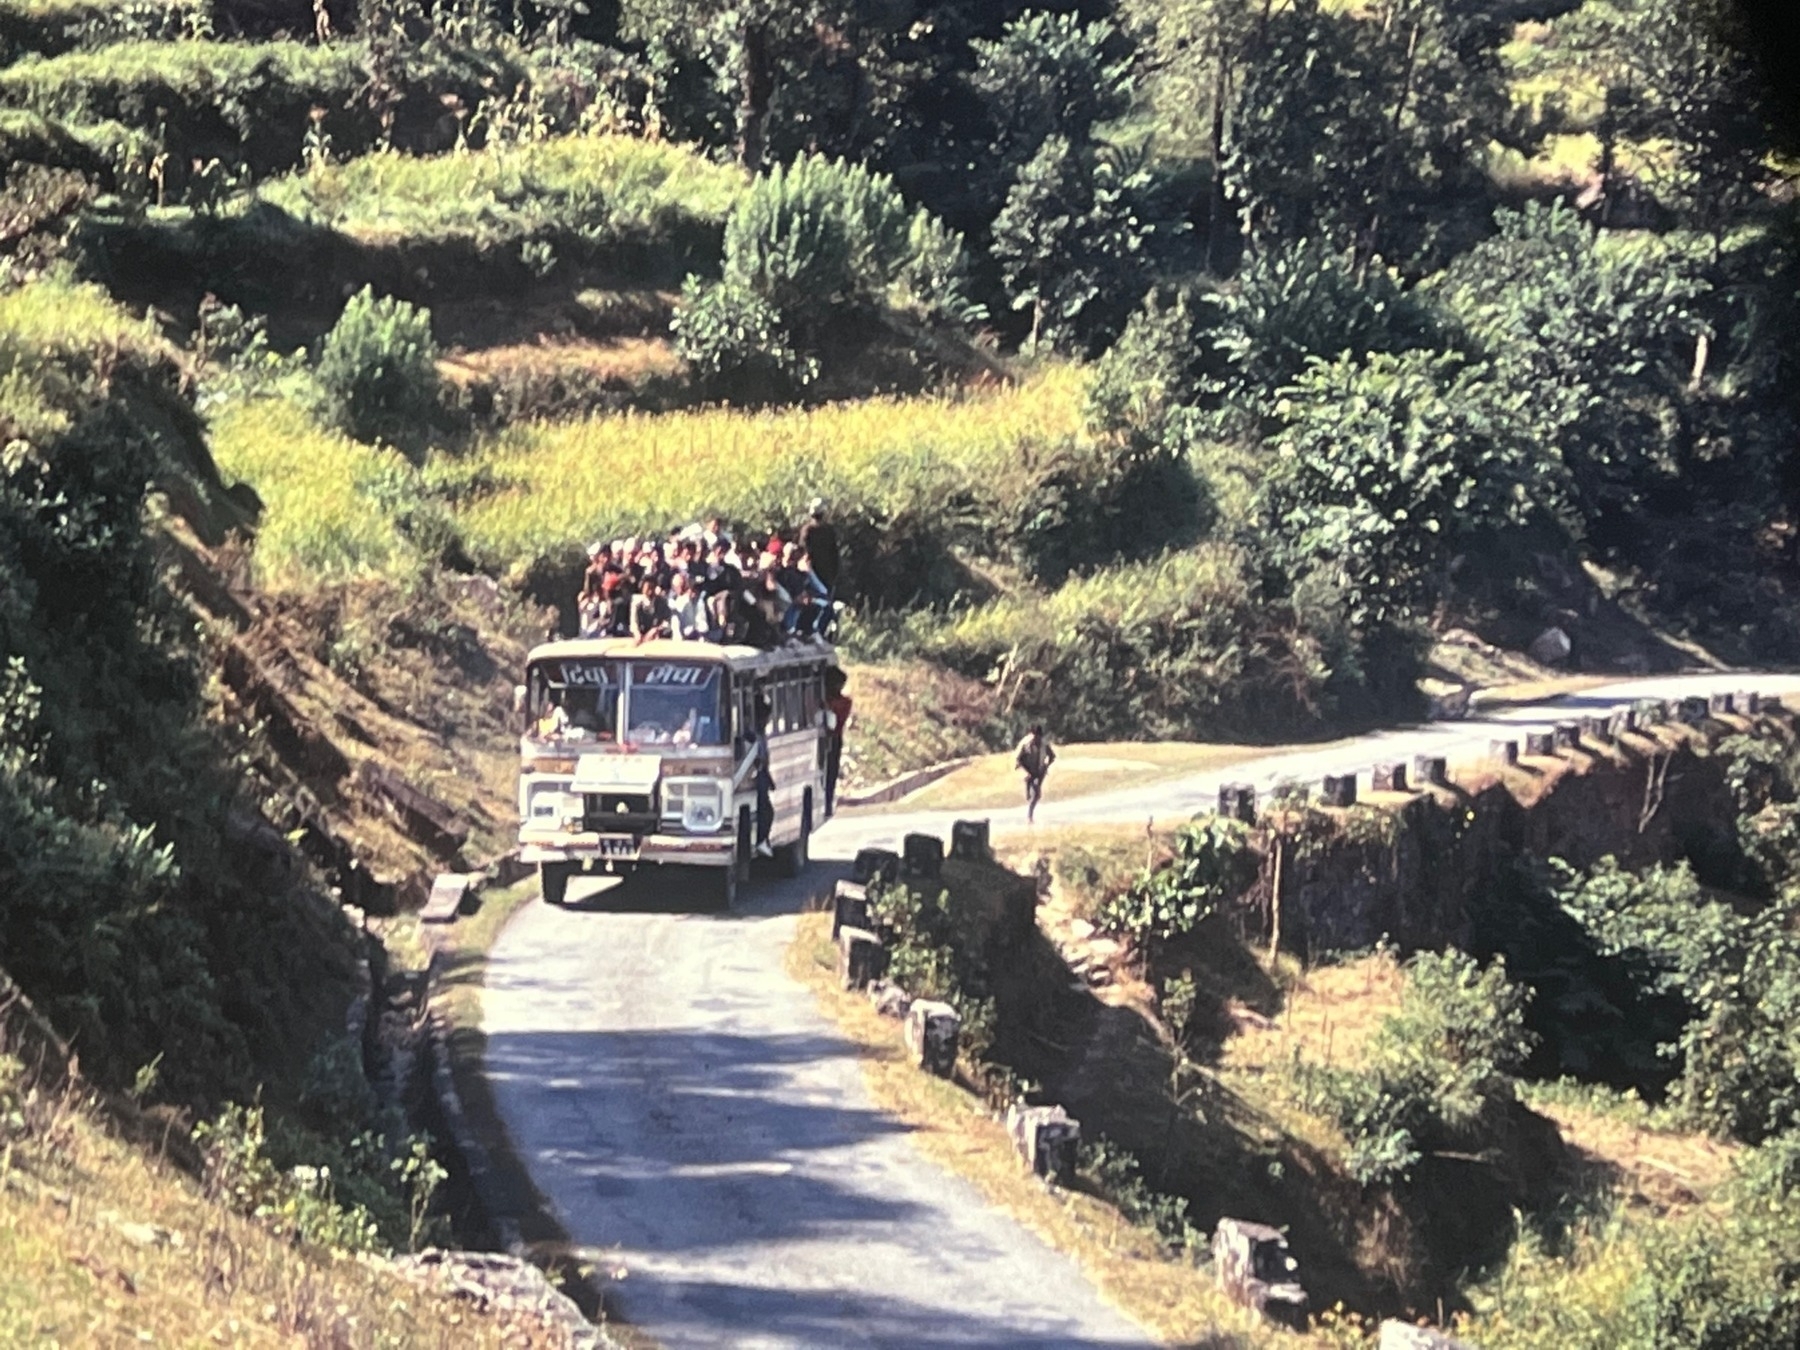 Bus with a lot of people sitting on the roof, somewhere in Nepal in 1989